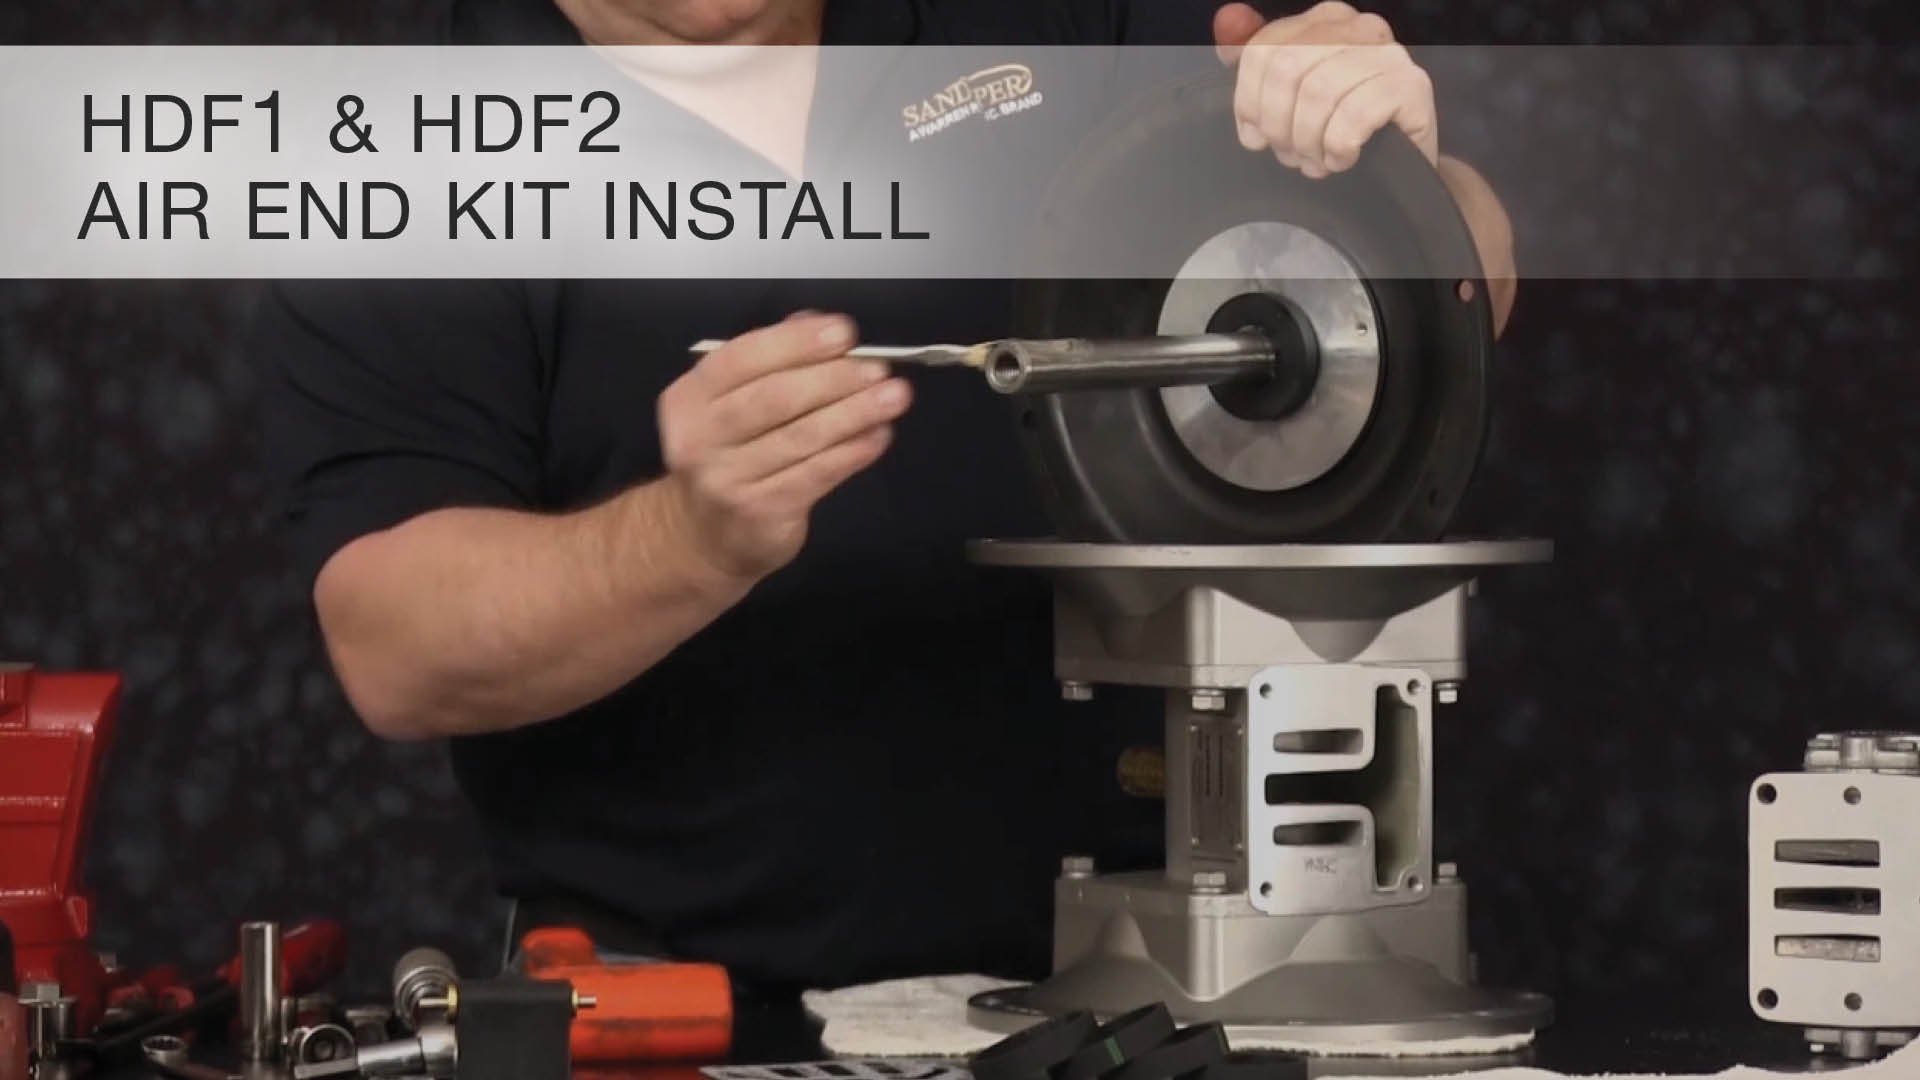 HDF1 and HDF2 Air End Kit Install